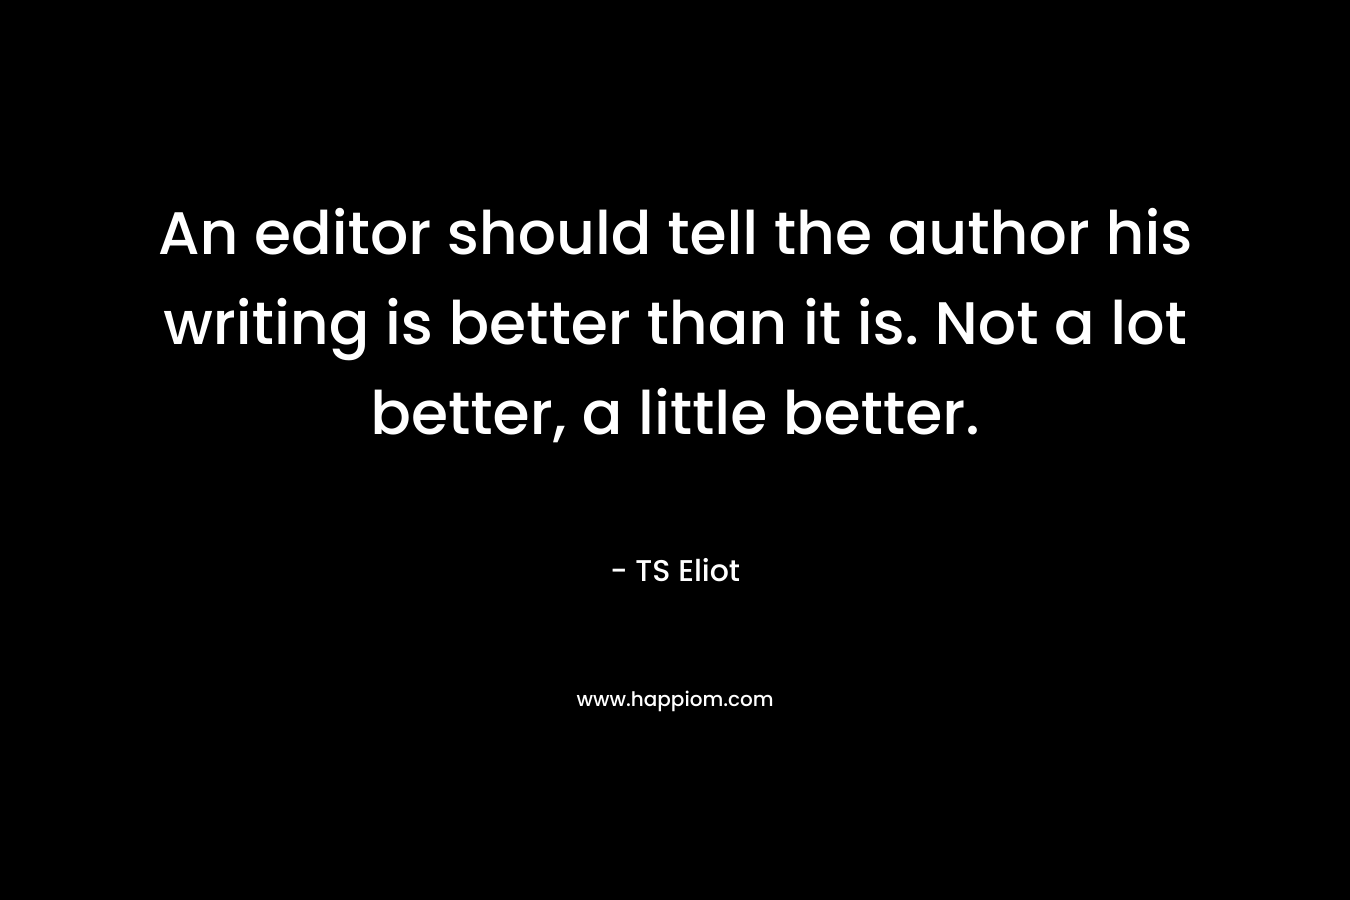 An editor should tell the author his writing is better than it is. Not a lot better, a little better. – TS Eliot